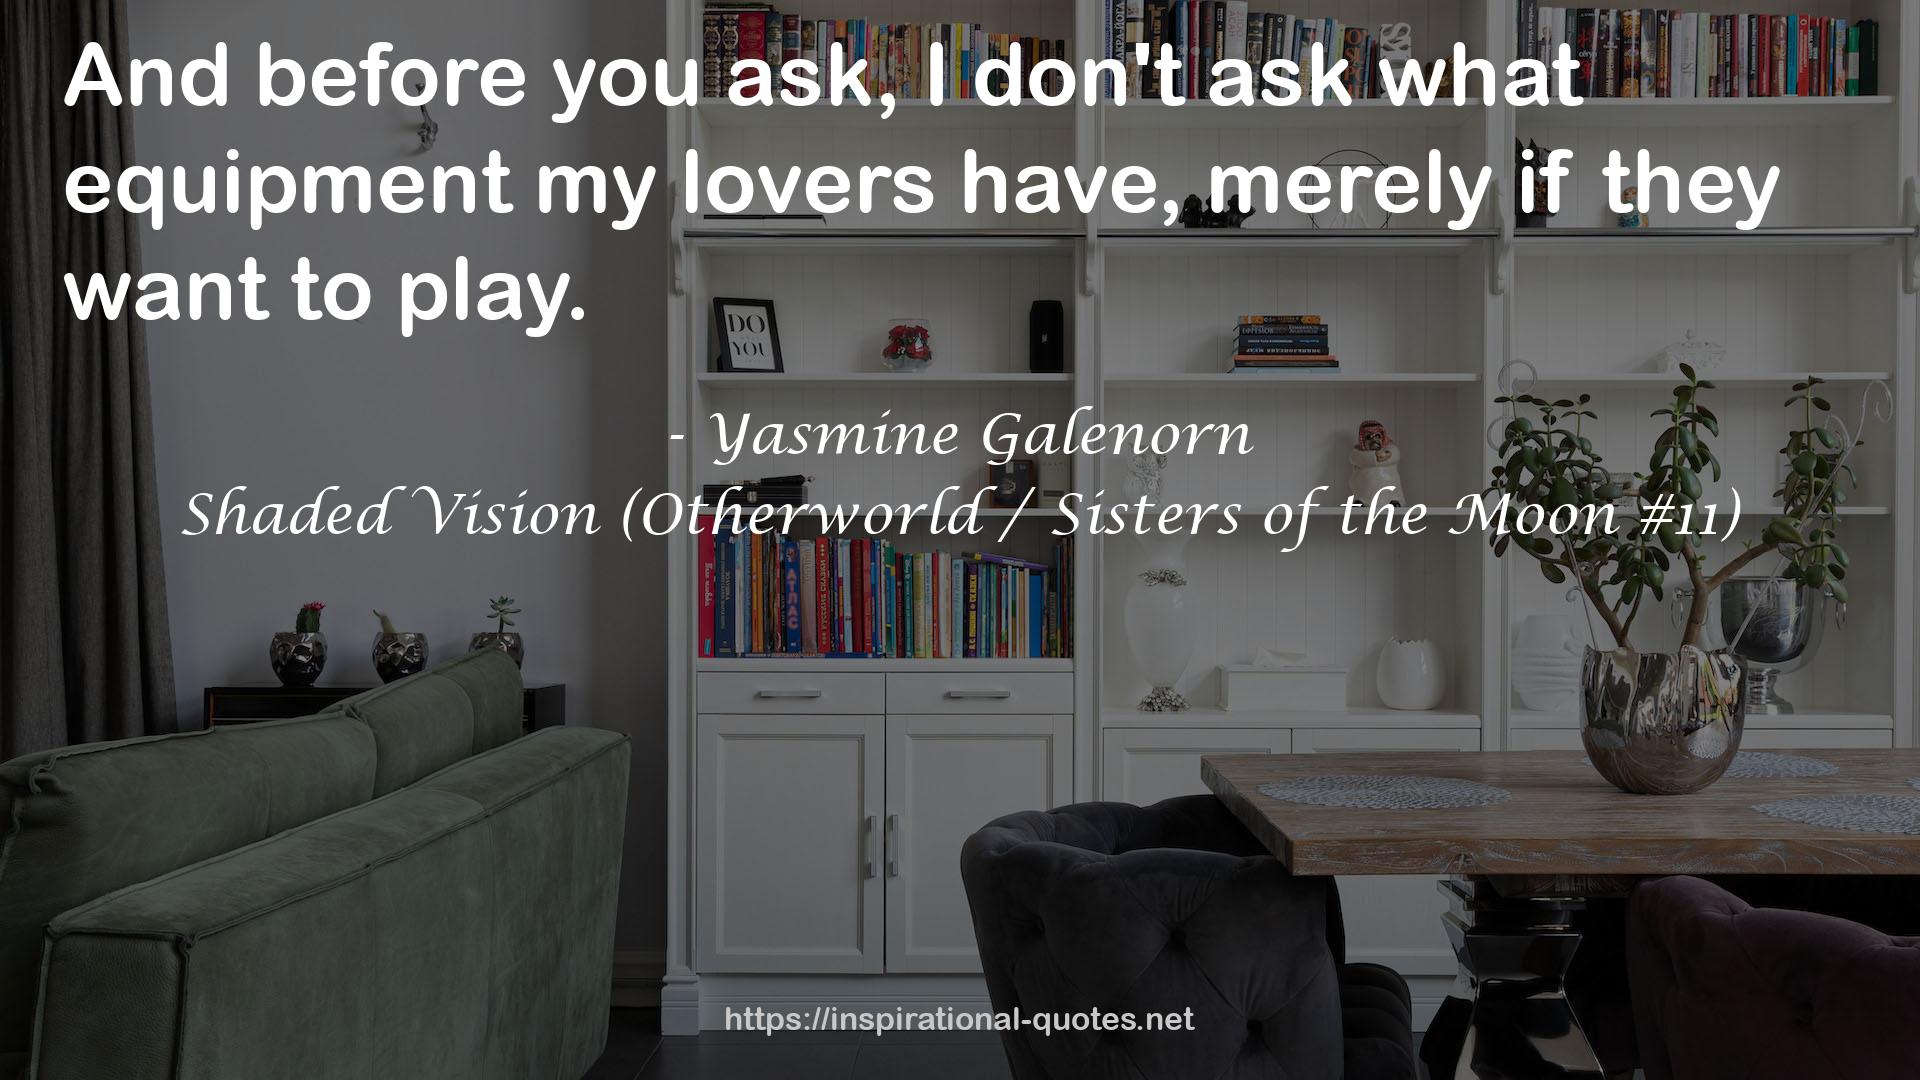 Shaded Vision (Otherworld / Sisters of the Moon #11) QUOTES